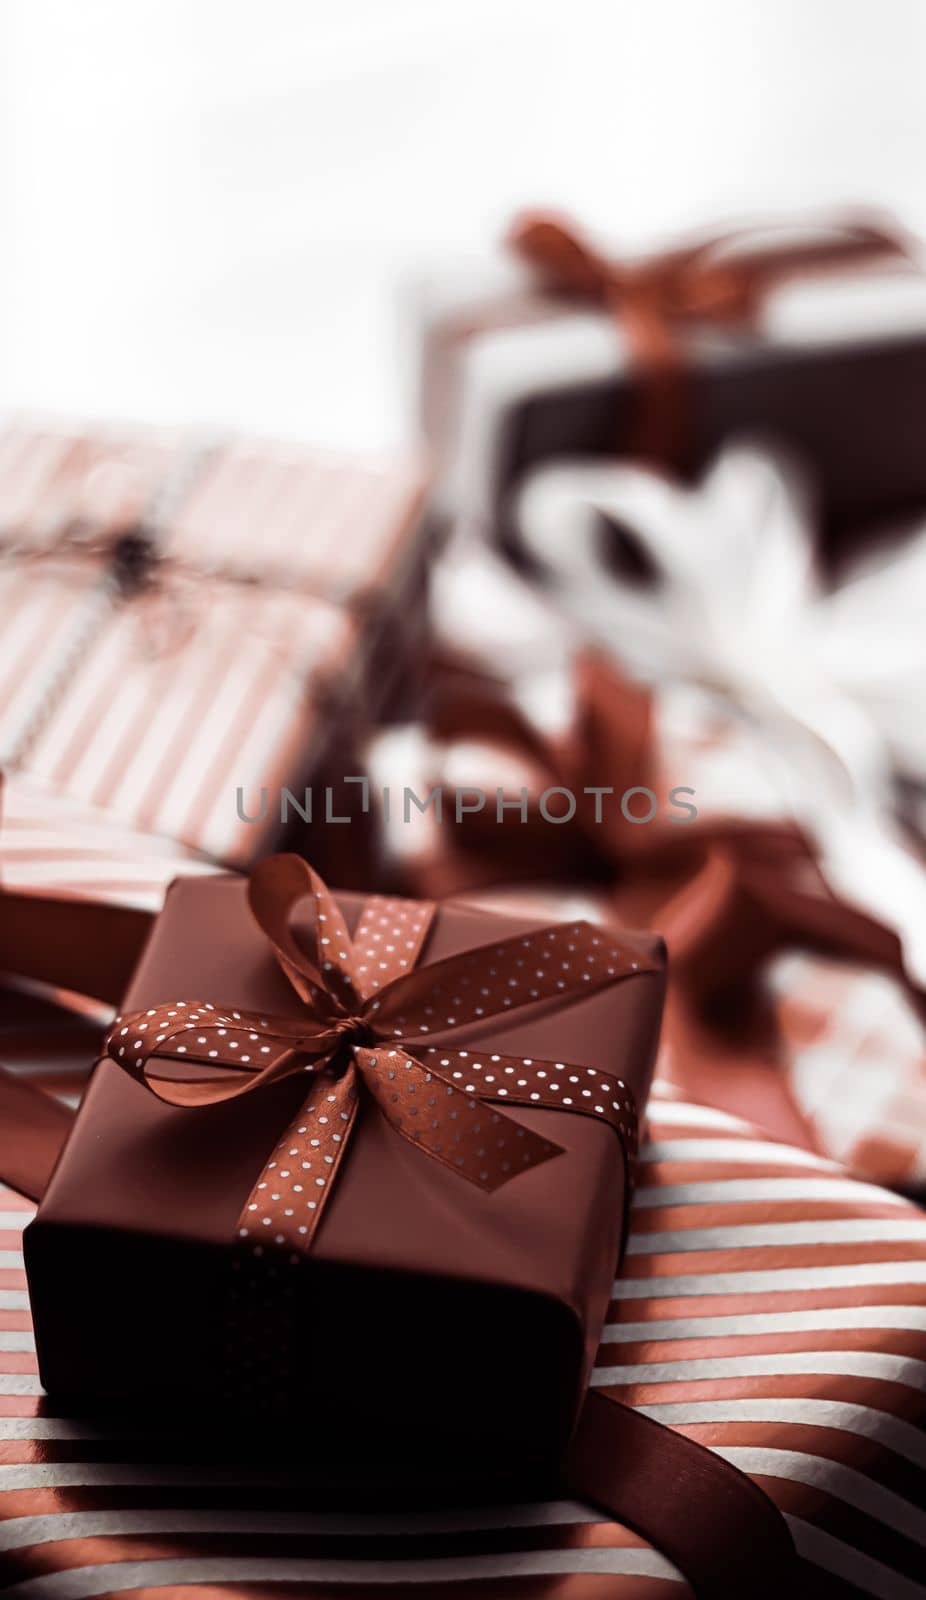 Holiday gifts and wrapped luxury presents, chocolate gift boxes as surprise present for birthday, Christmas, New Year, Valentines Day, boxing day, wedding and holidays shopping or beauty box delivery concept